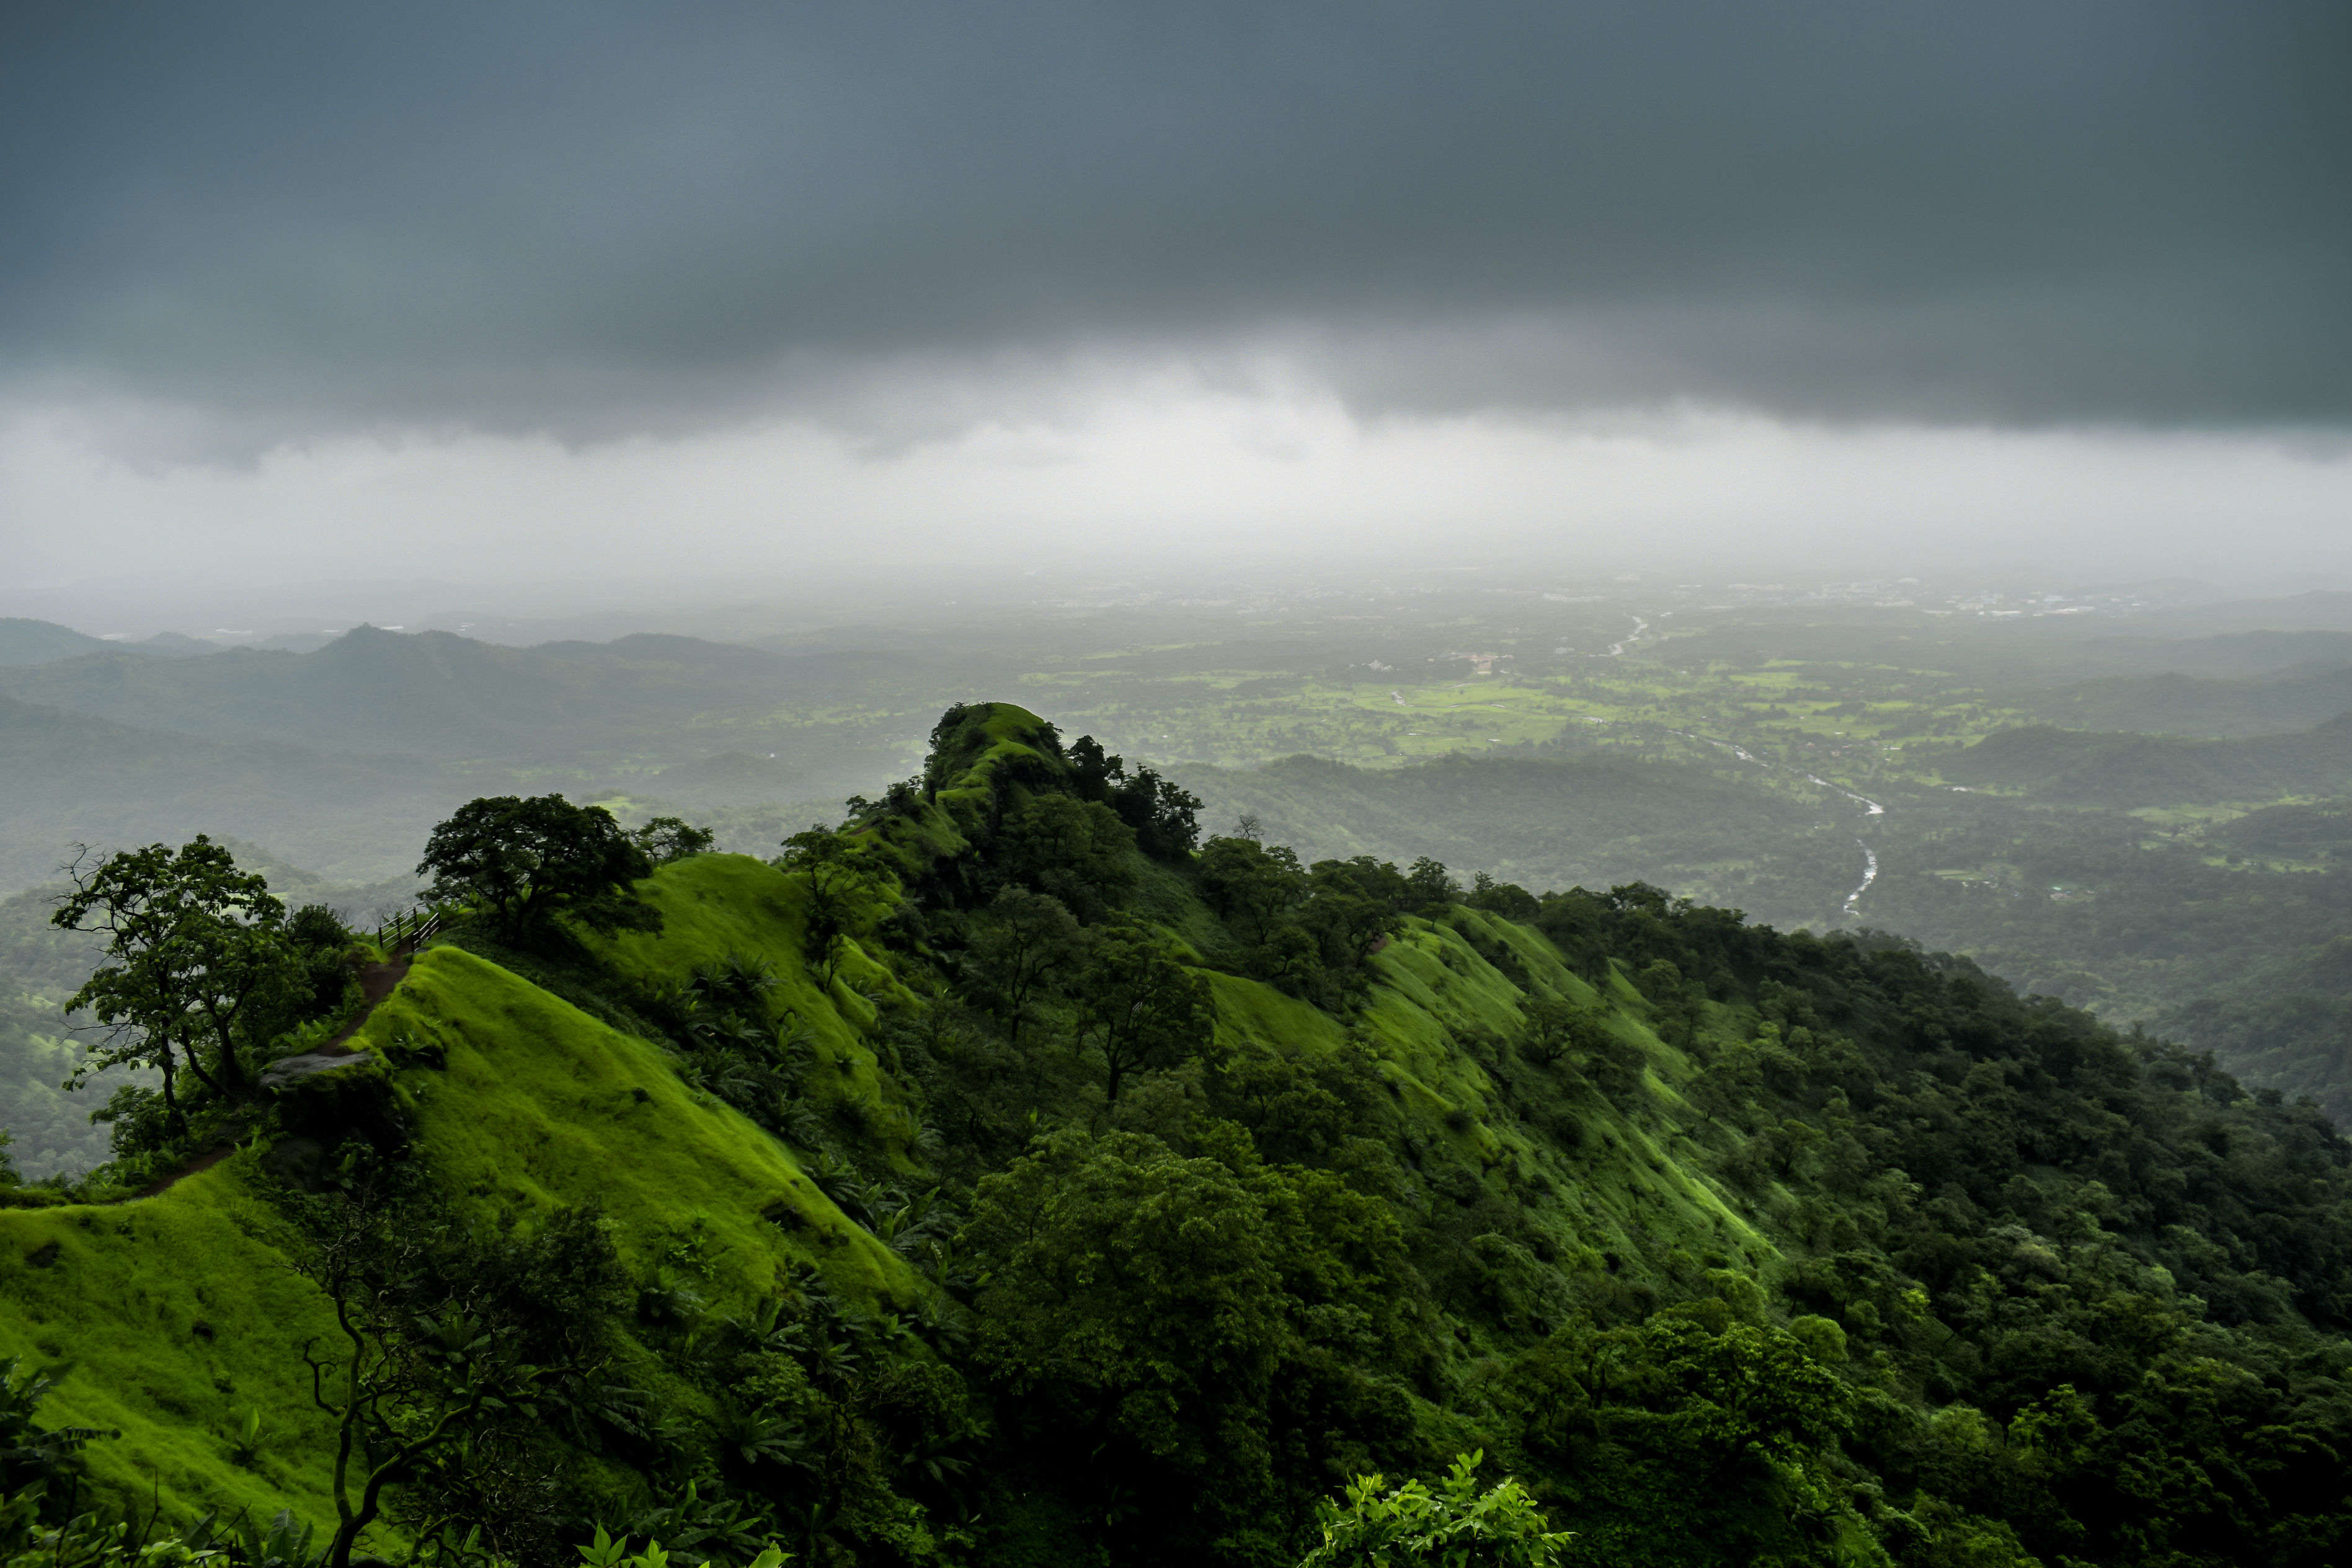 Now experience the Western Ghats through India's first canopy walk